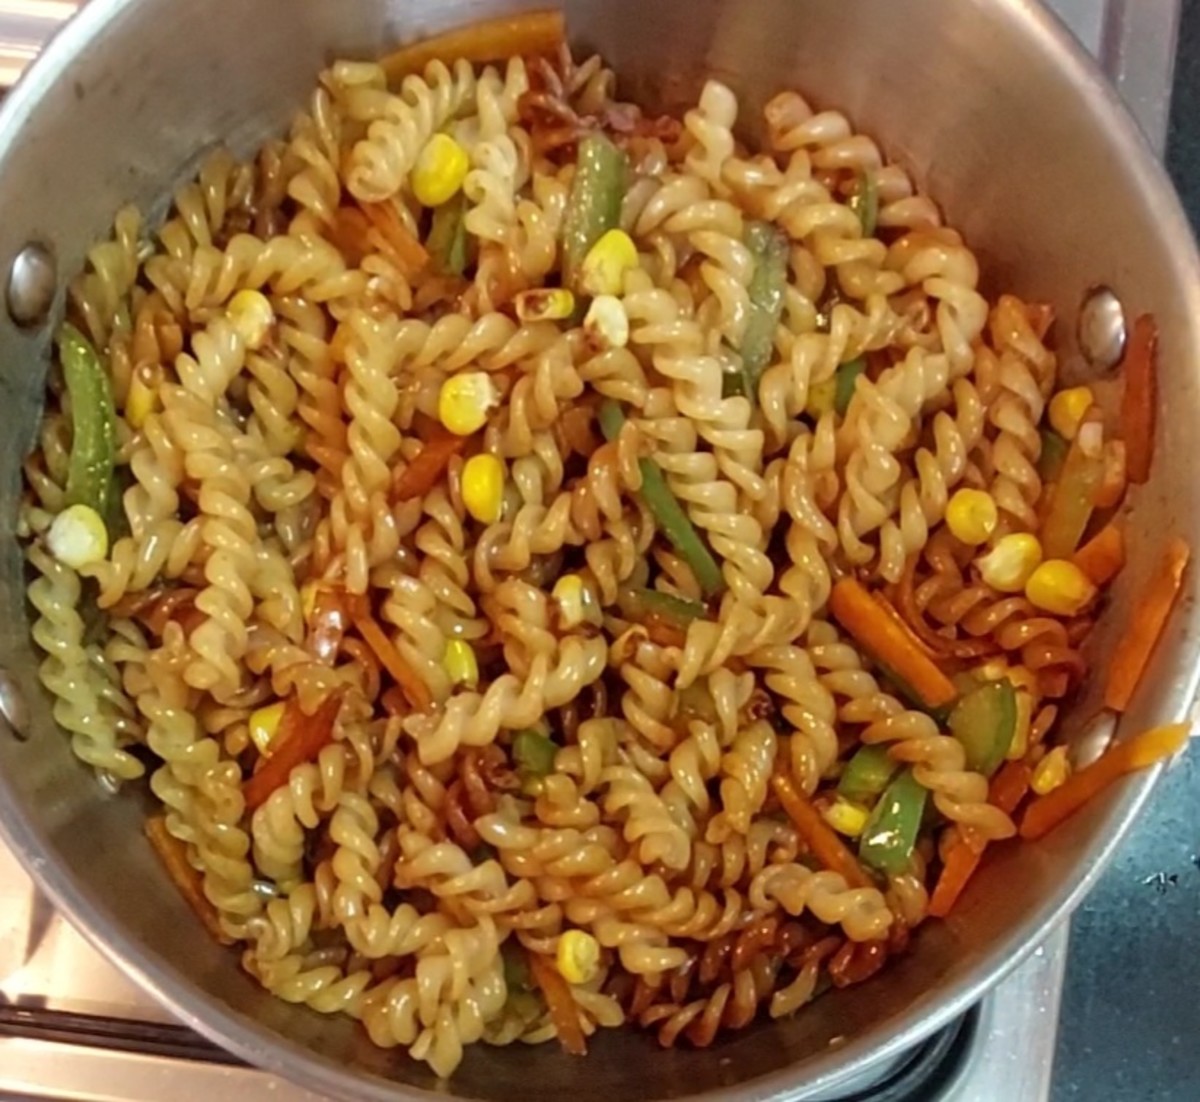 Mix to combine pasta well with sauces. Close the lid and cook for 2 minutes.